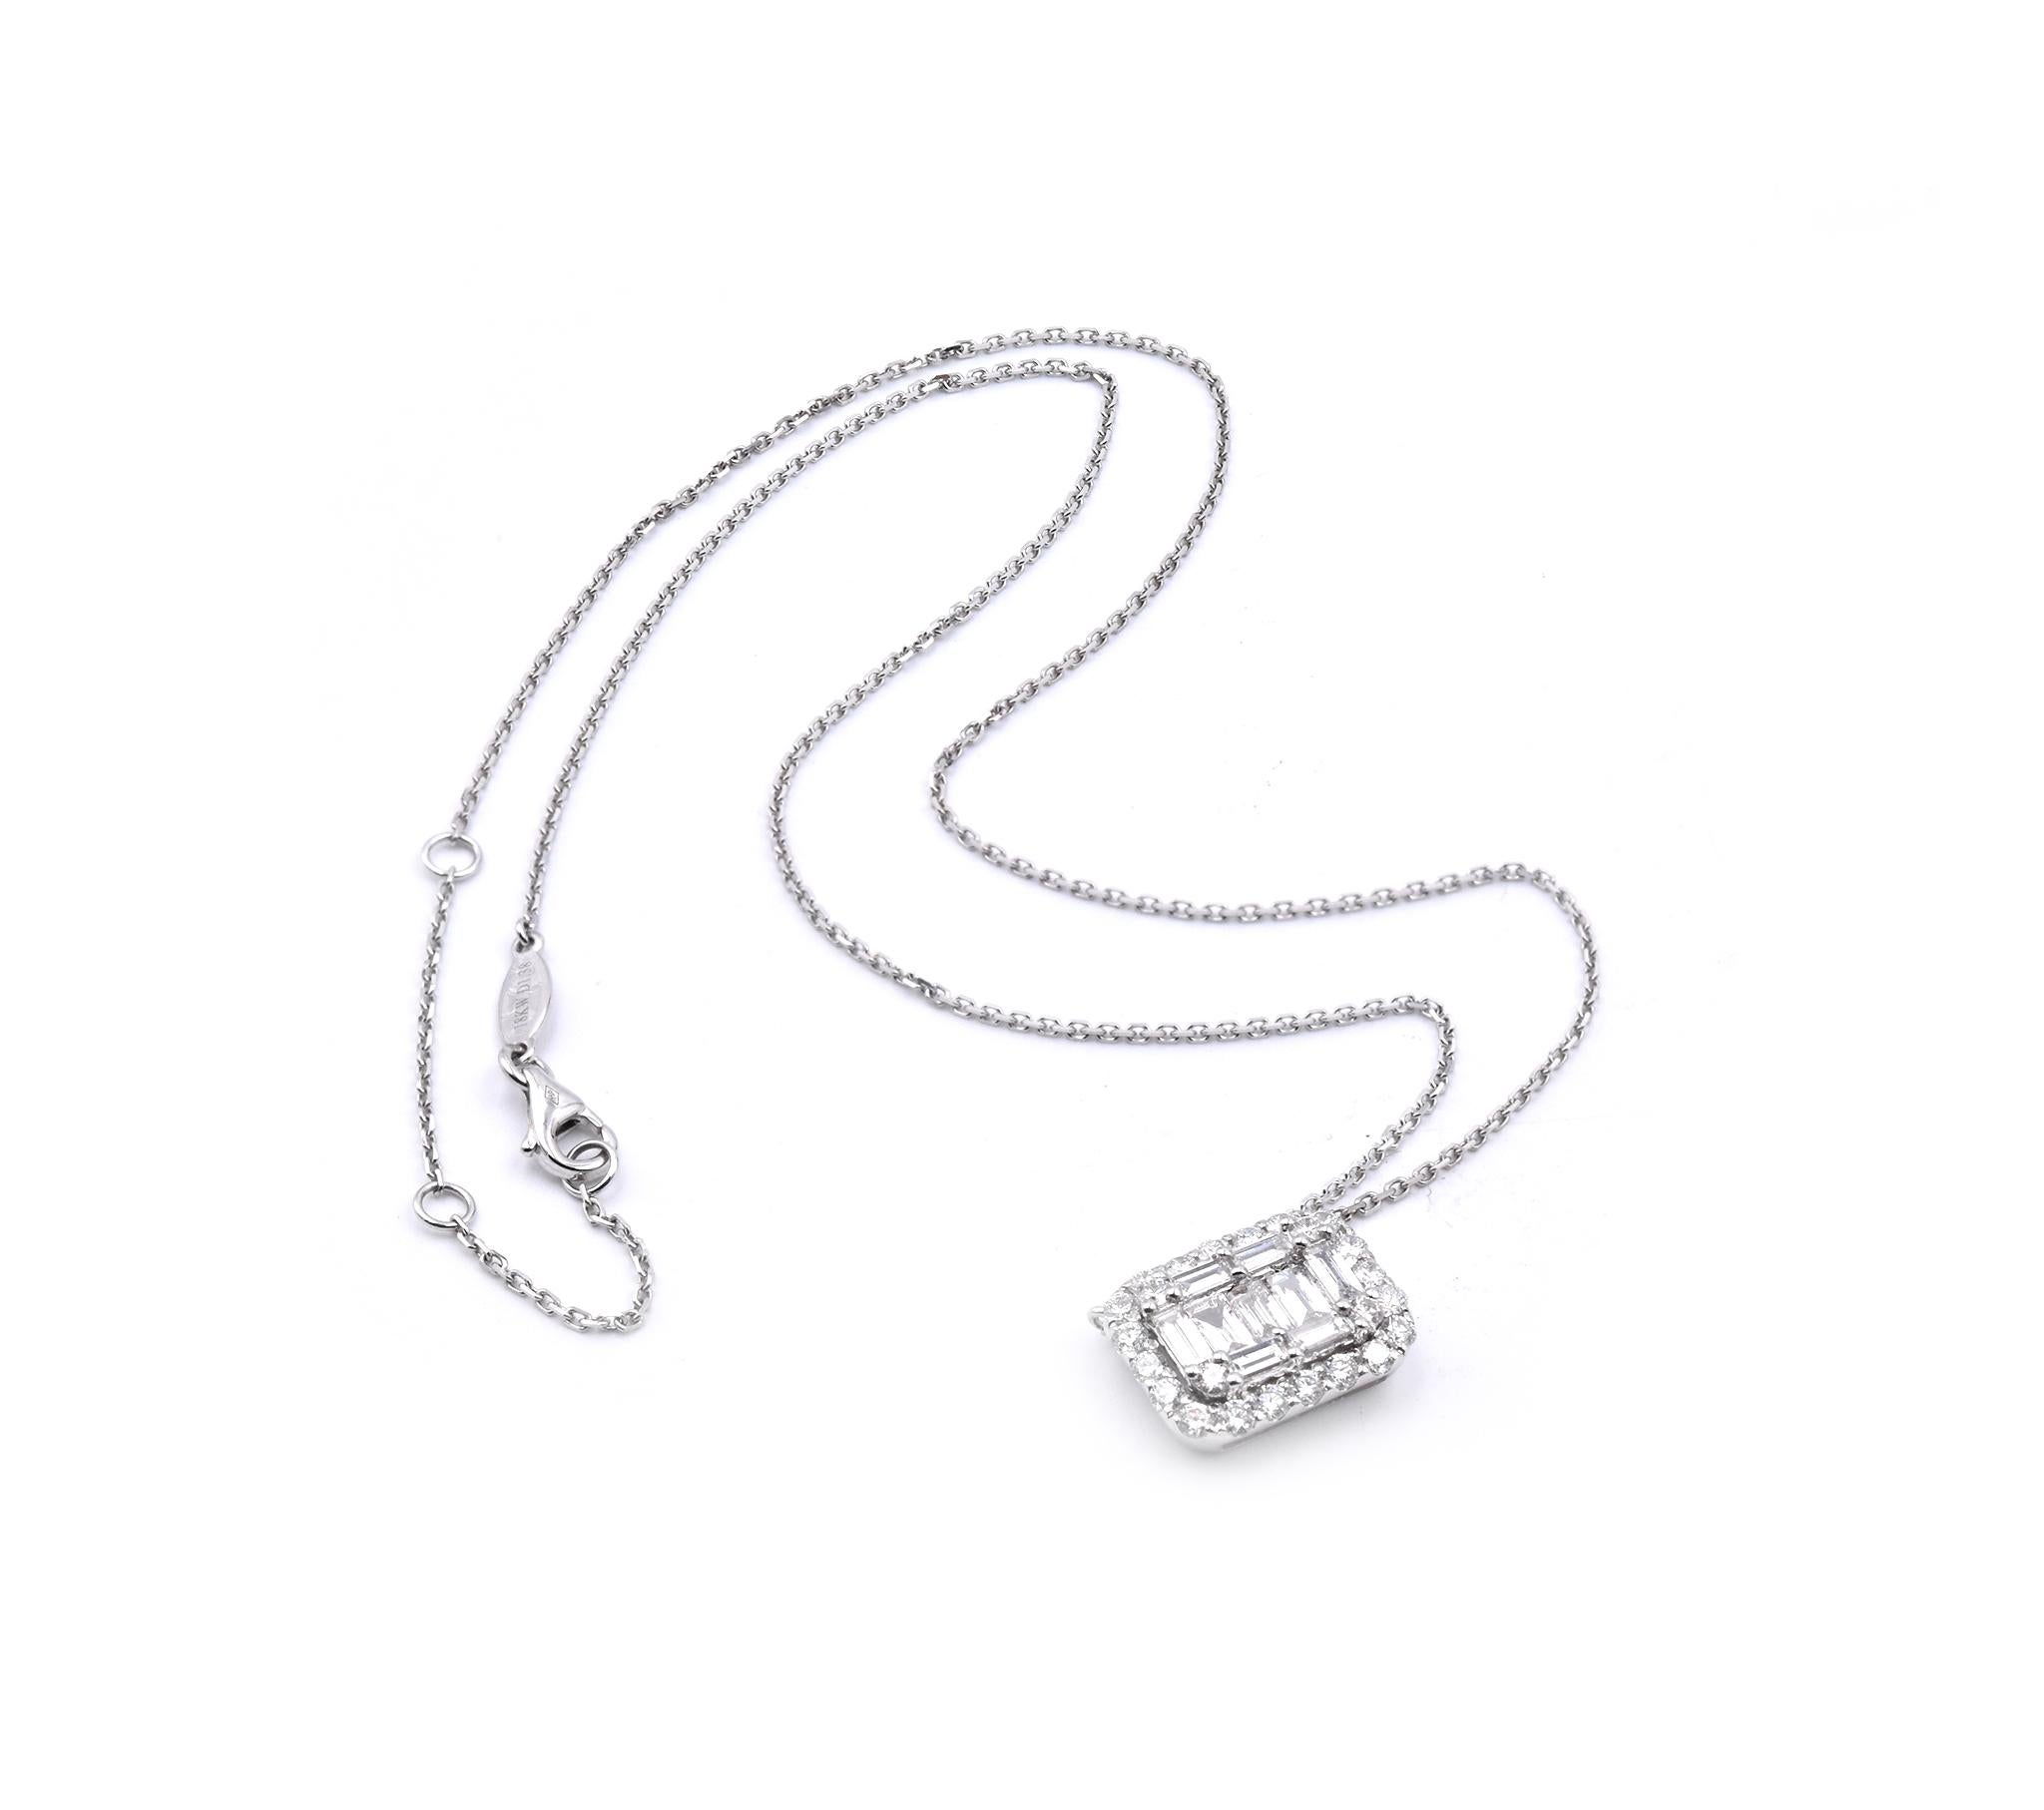 Designer: Custom
Material: 18K white gold
Diamonds: 34 round & baguette cuts = 1.32cttw
Color: G
Clarity: VS
Dimensions: necklace is adjustable from 18 to 16-inches in length
Weight: 5.00 grams
